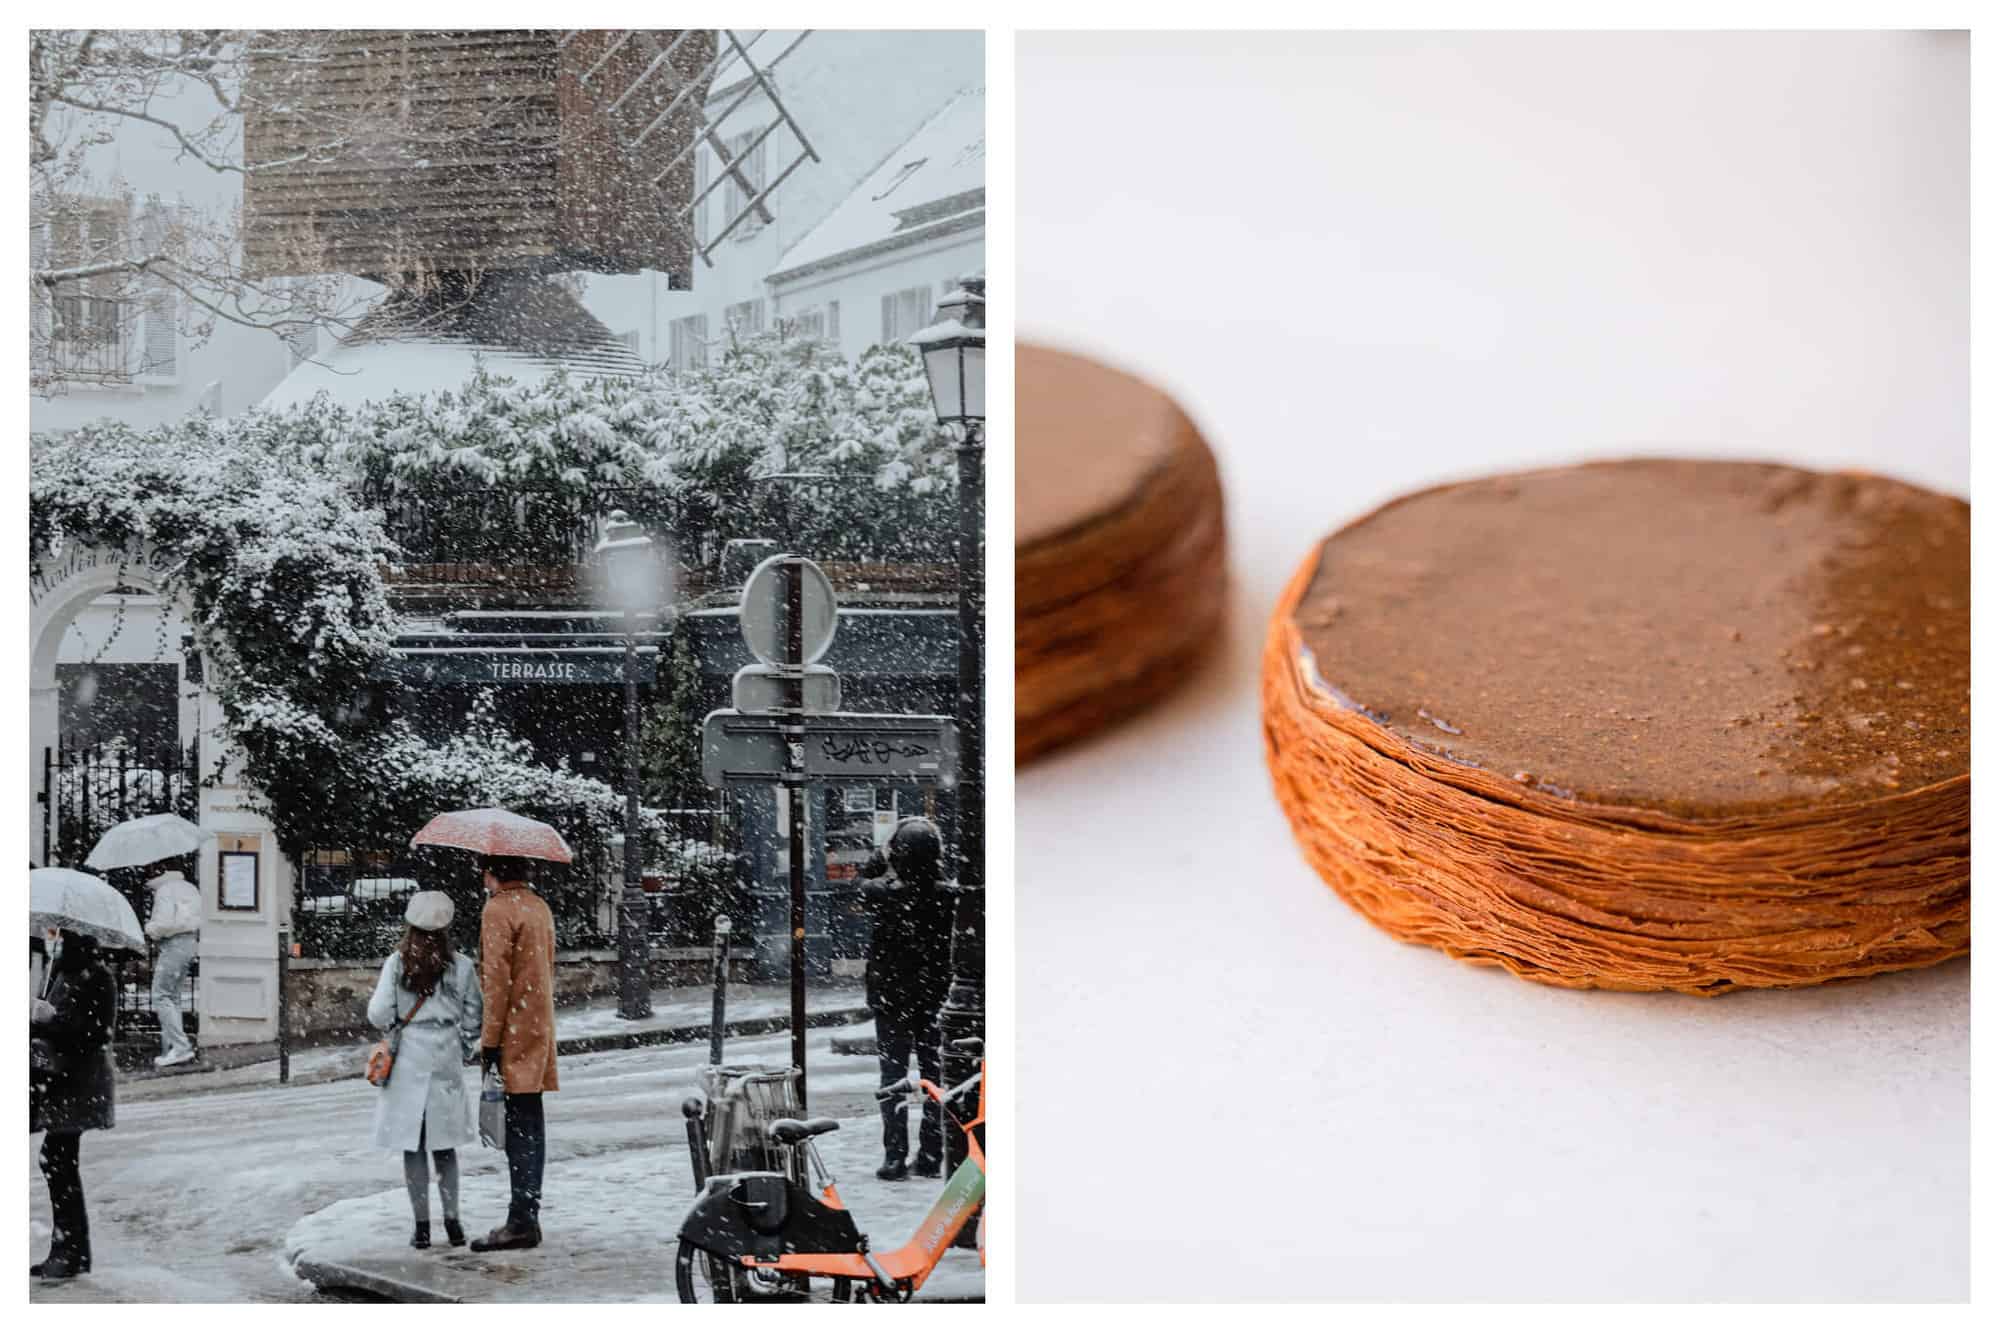 Left: a couple standing under an umbrella in the snow in front of Moulin de la Galette restaurant in Montmartre. Right: two galettes des rois with a praline topping by Le Meurice Paris.